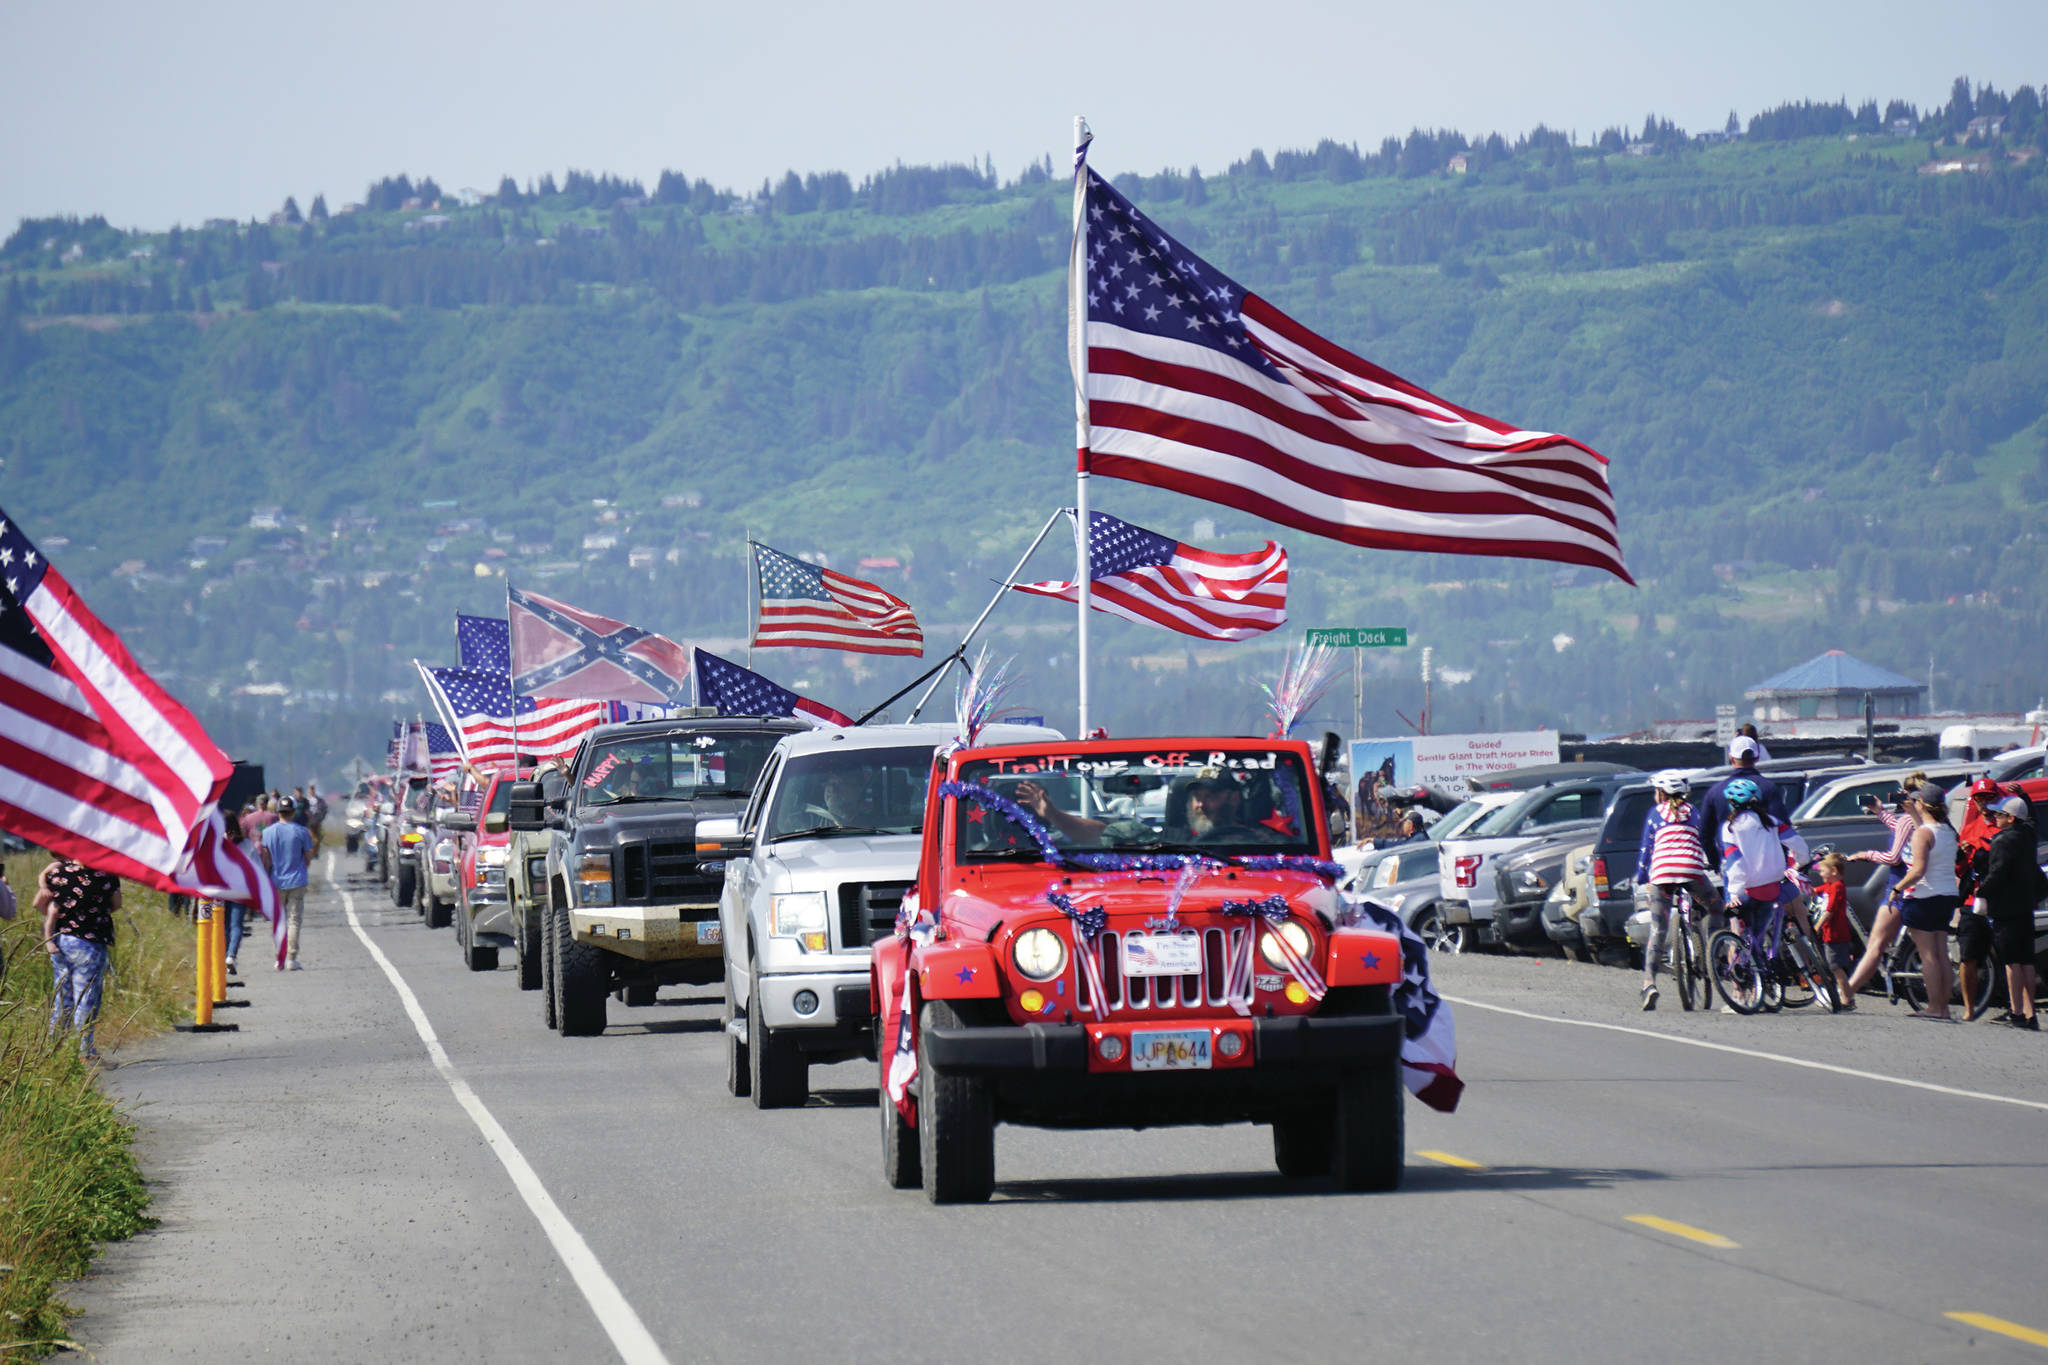 Driving a red Jeep, Matthew Mitchell leads an unofficial parade from Soundview Avenue on the Sterling Highway to the end of the Homer Spit on Saturday, July 4, 2020 in Homer, Alaska. Mitchell helped organize the event after the Homer Chamber of Commerce and Visitor Center canceled Homer’s Fourth of July parade. (Photo by Michael Armstrong/Homer News)